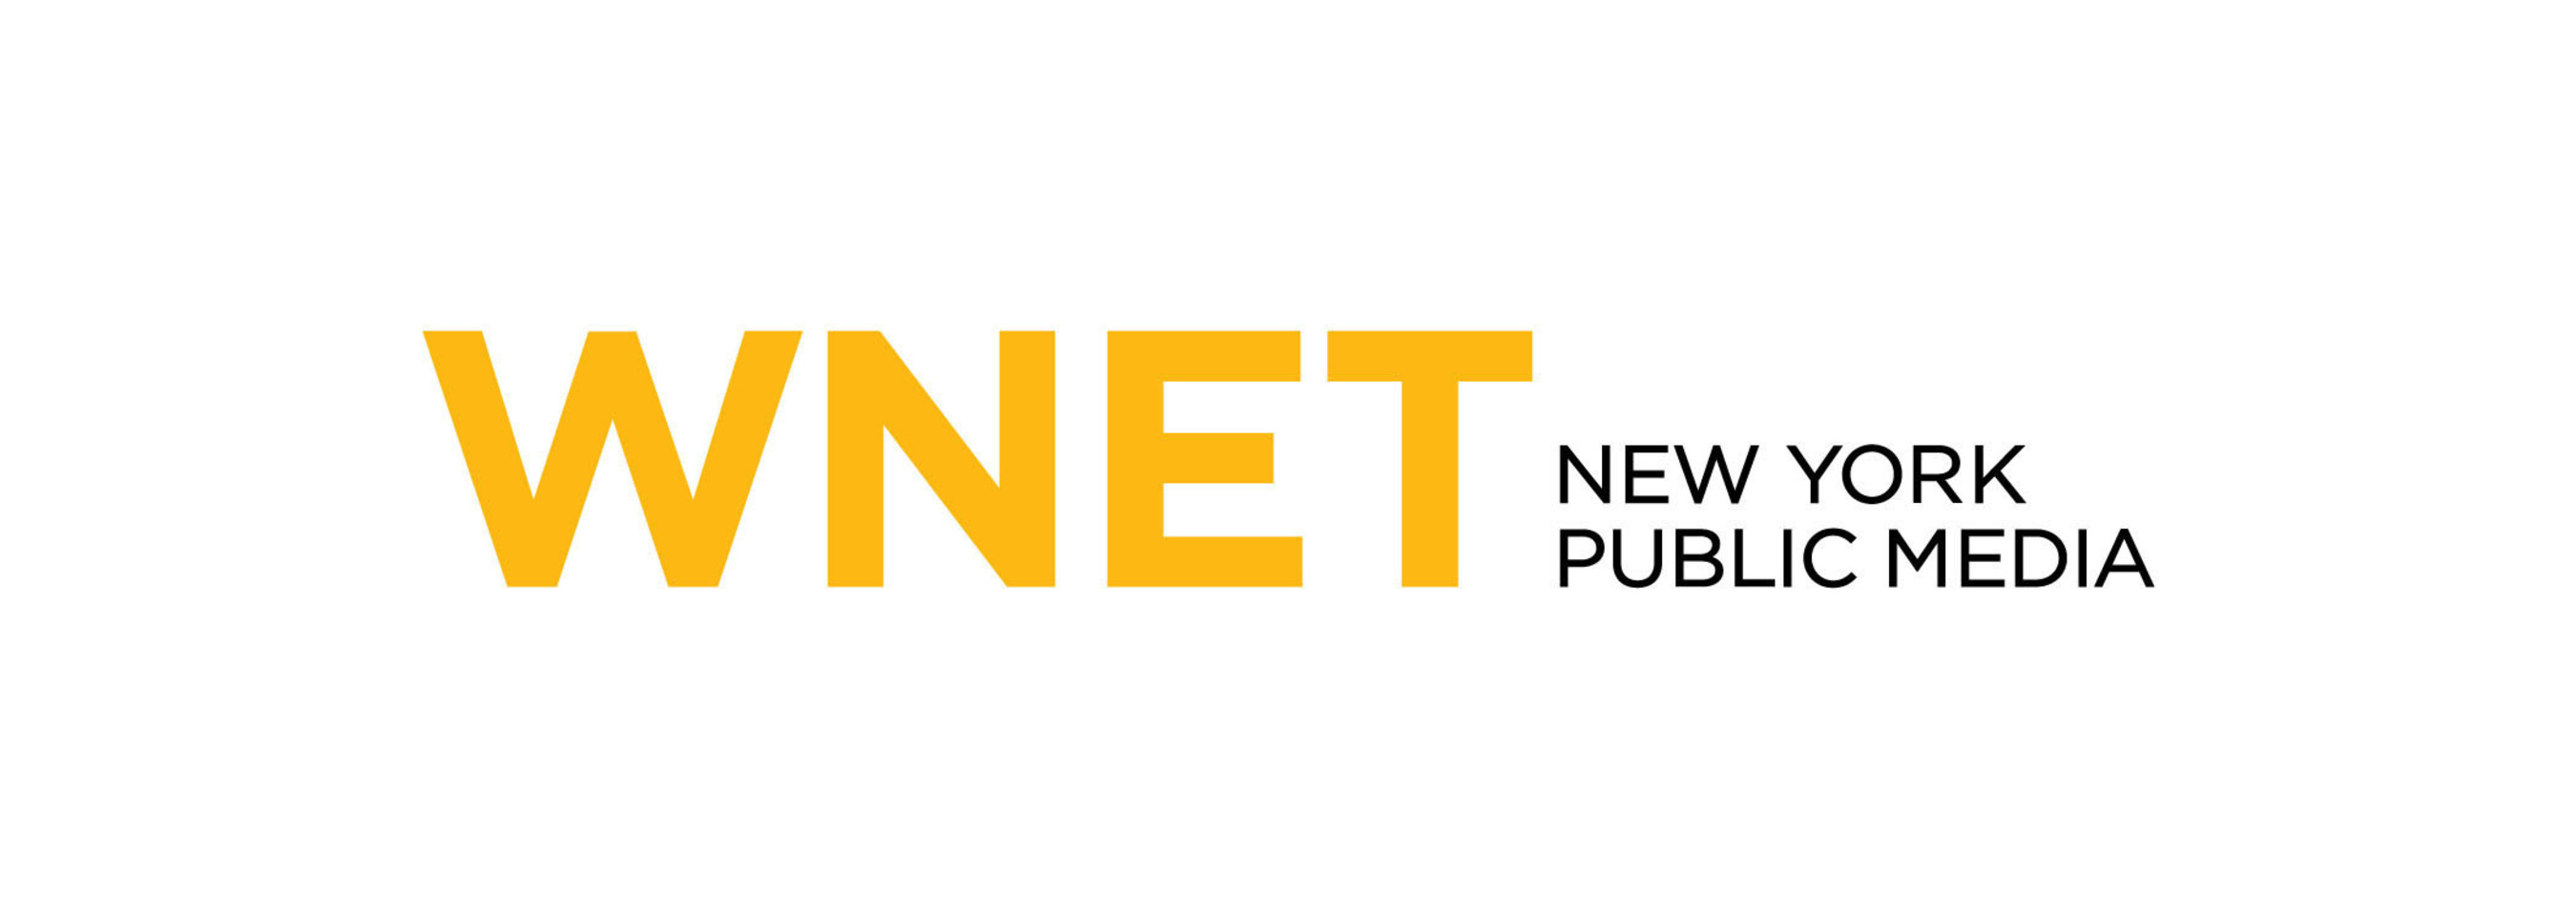 WNET is New York's flagship PBS station